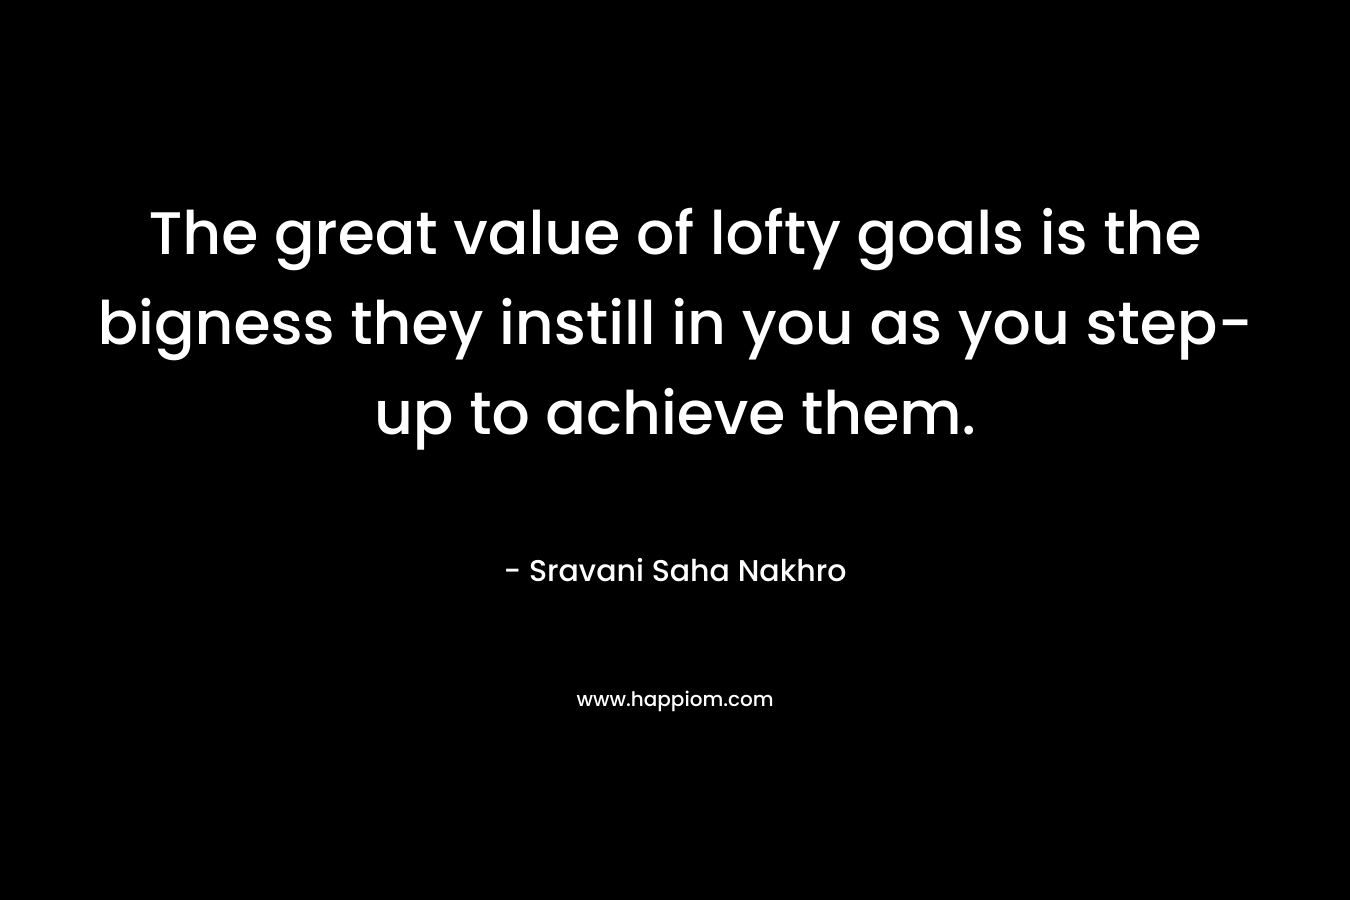 The great value of lofty goals is the bigness they instill in you as you step-up to achieve them.